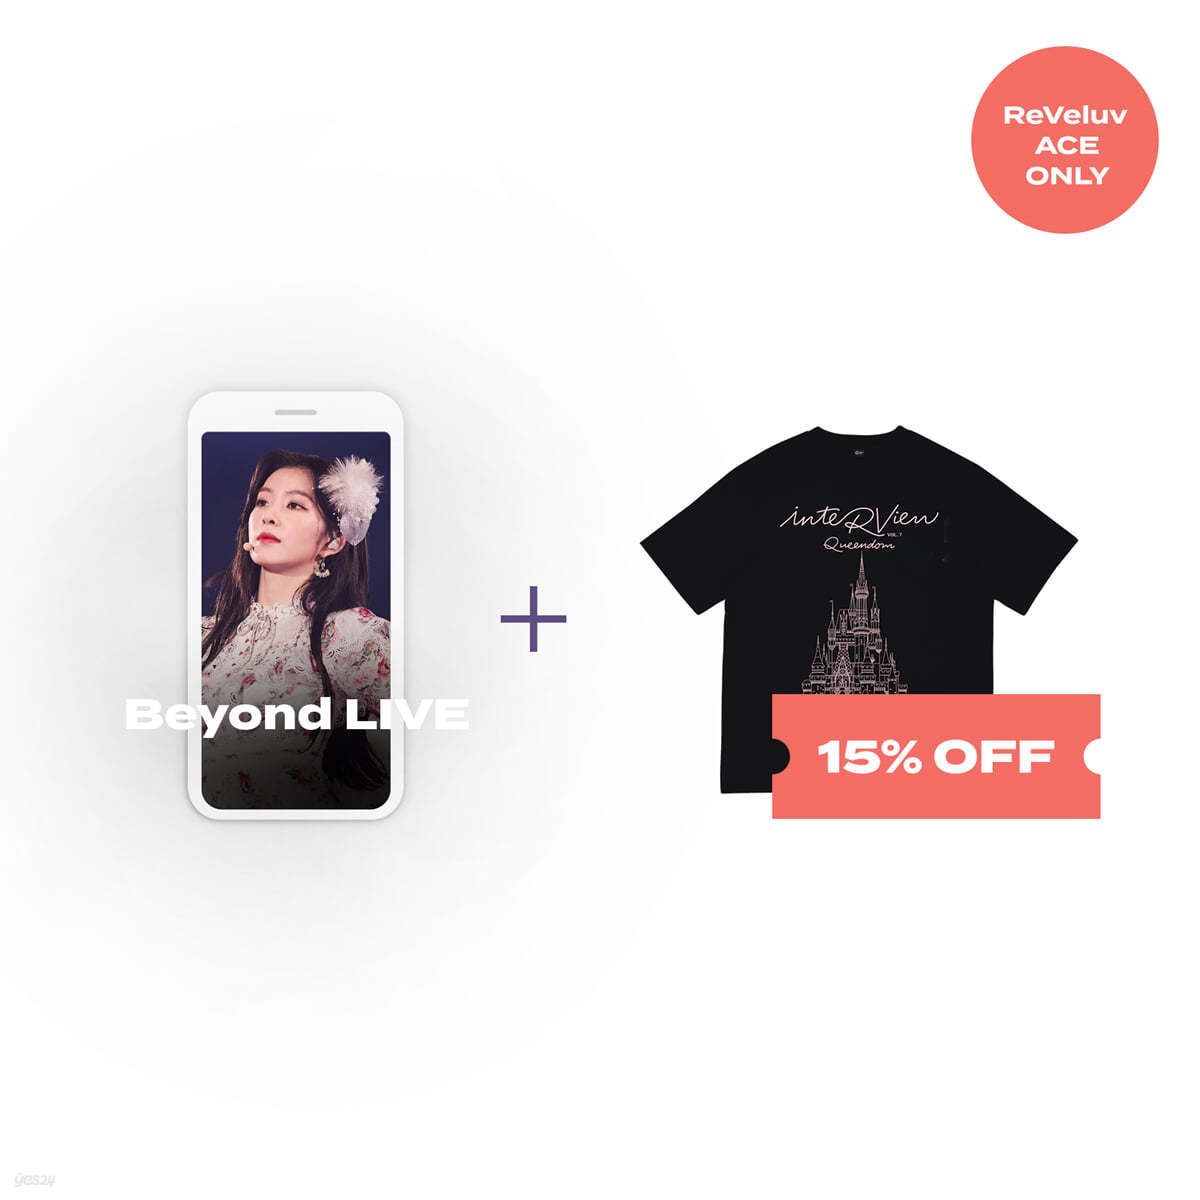 [ReVeluv ACE ONLY] Beyond LIVE 관람권 + T-SHIRT Beyond LIVE - Red Velvet Online Fanmeeting - inteRView vol.7 : Queendom